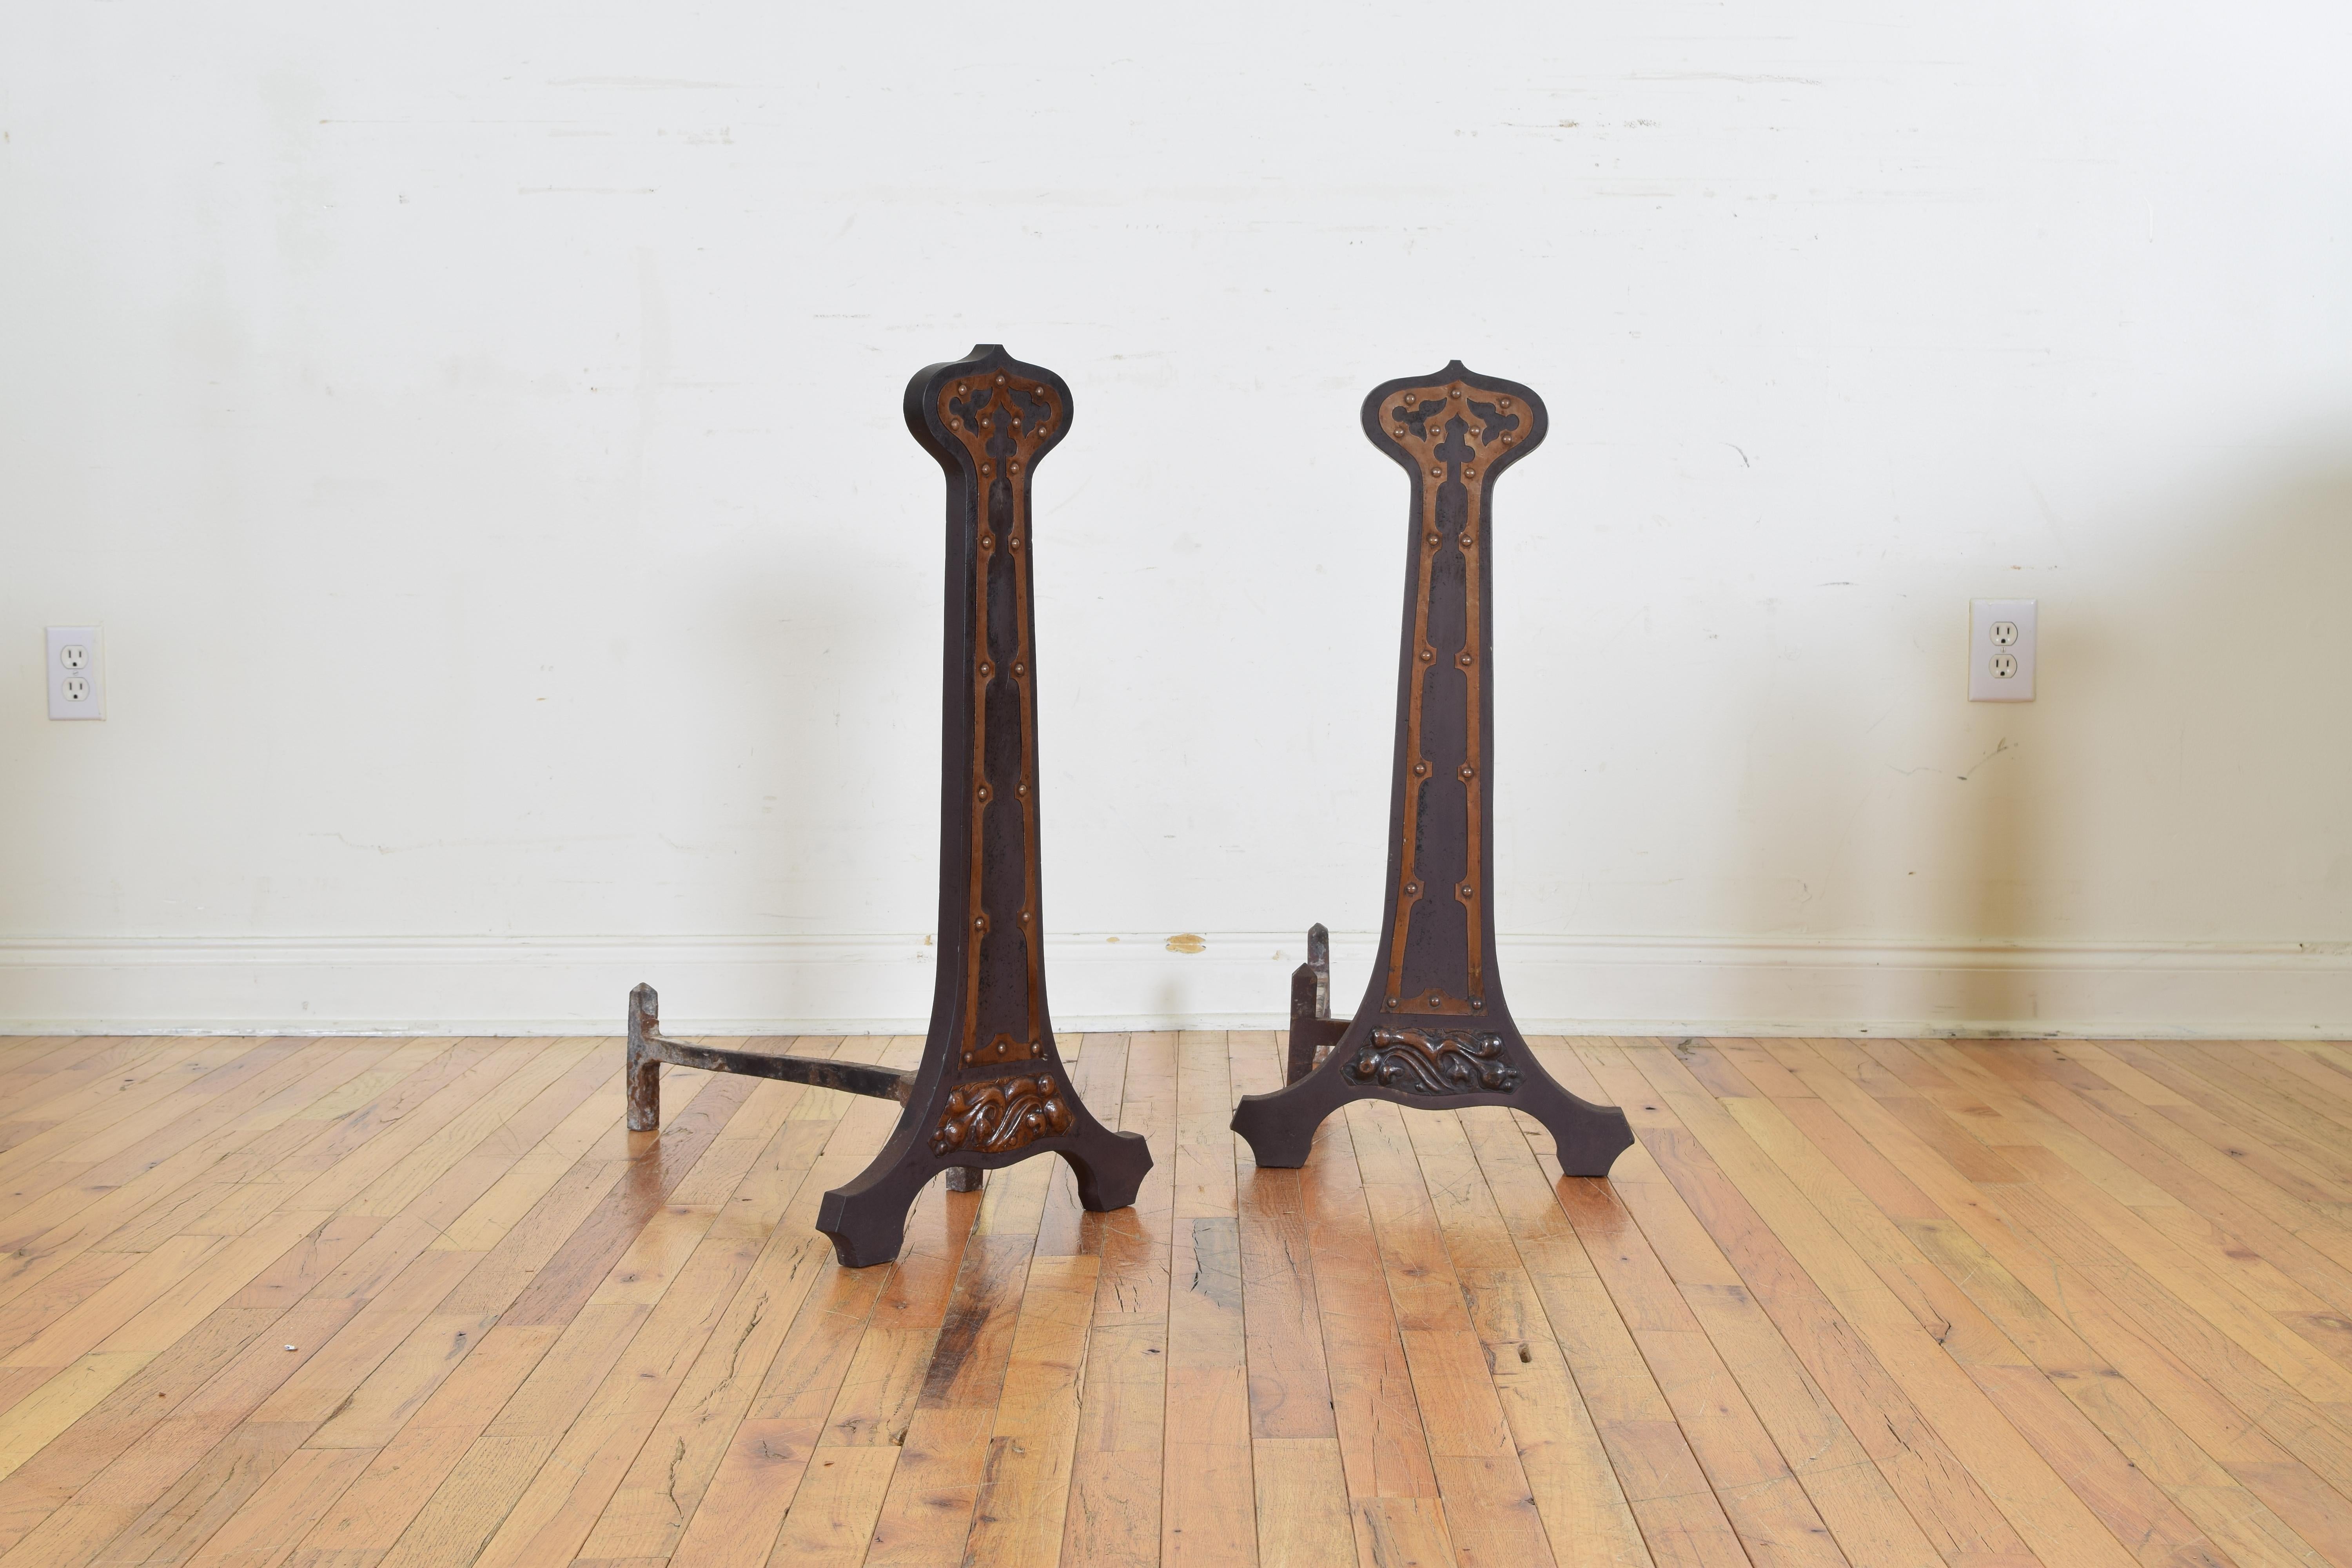 Pair of iron and copper andirons of larger scale and having spade shaped tops and splayed bracket feet, the fronts decorated with copper detailing and rivets/nailheads.